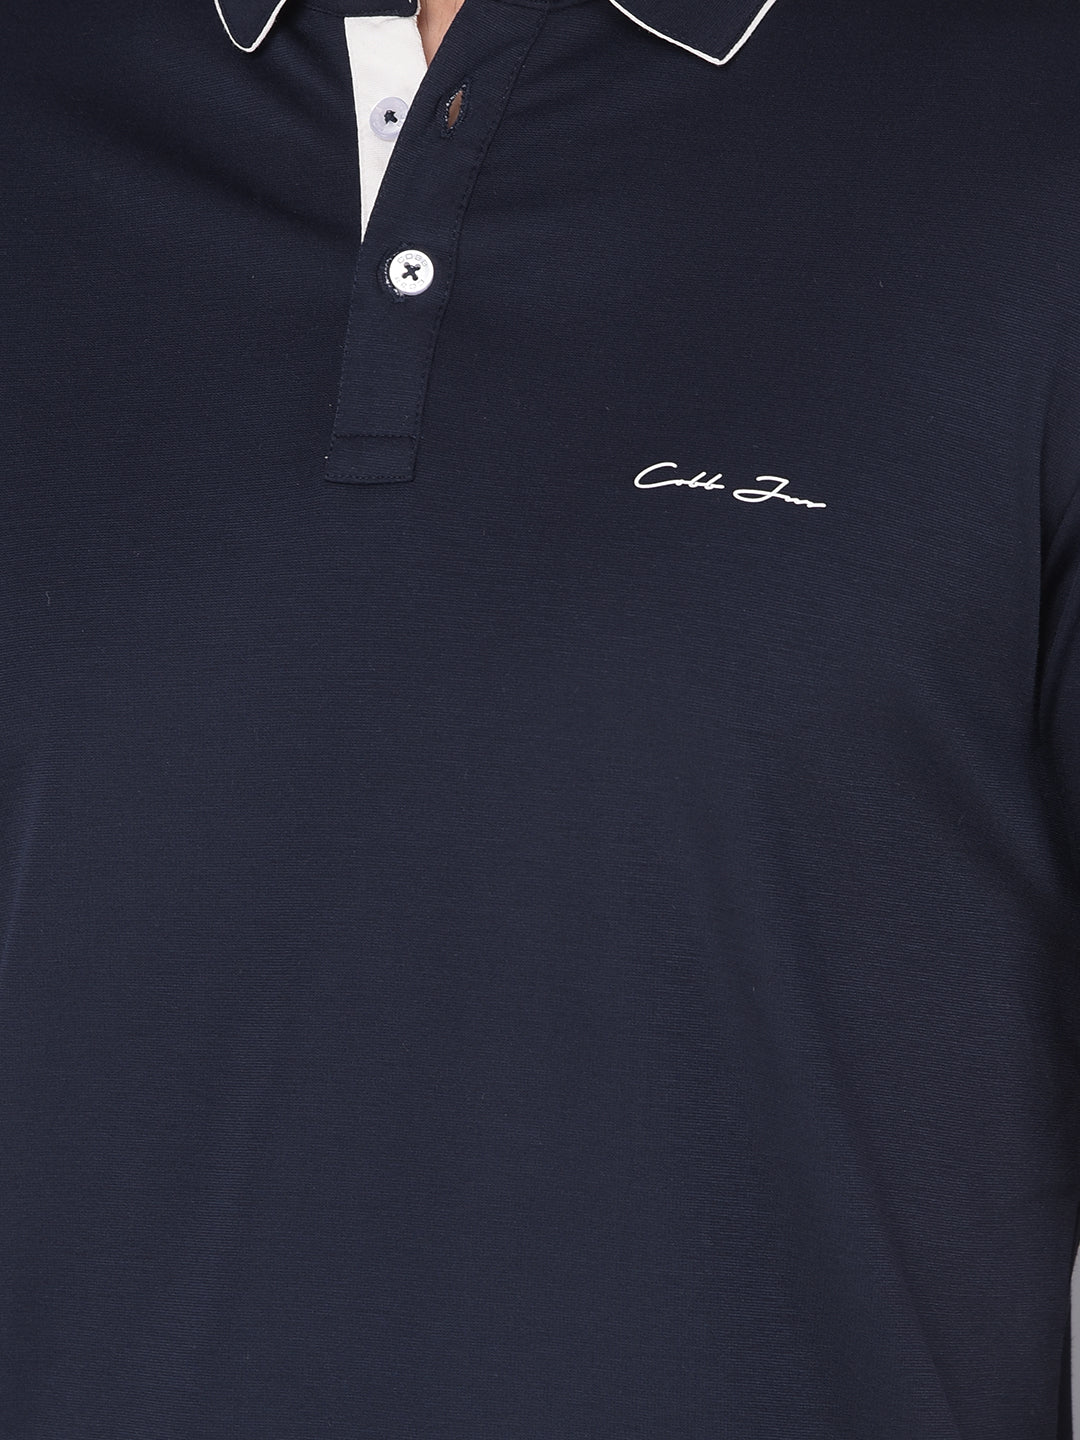 COBB SOLID NAVY BLUE POLO NECK T-SHIRT